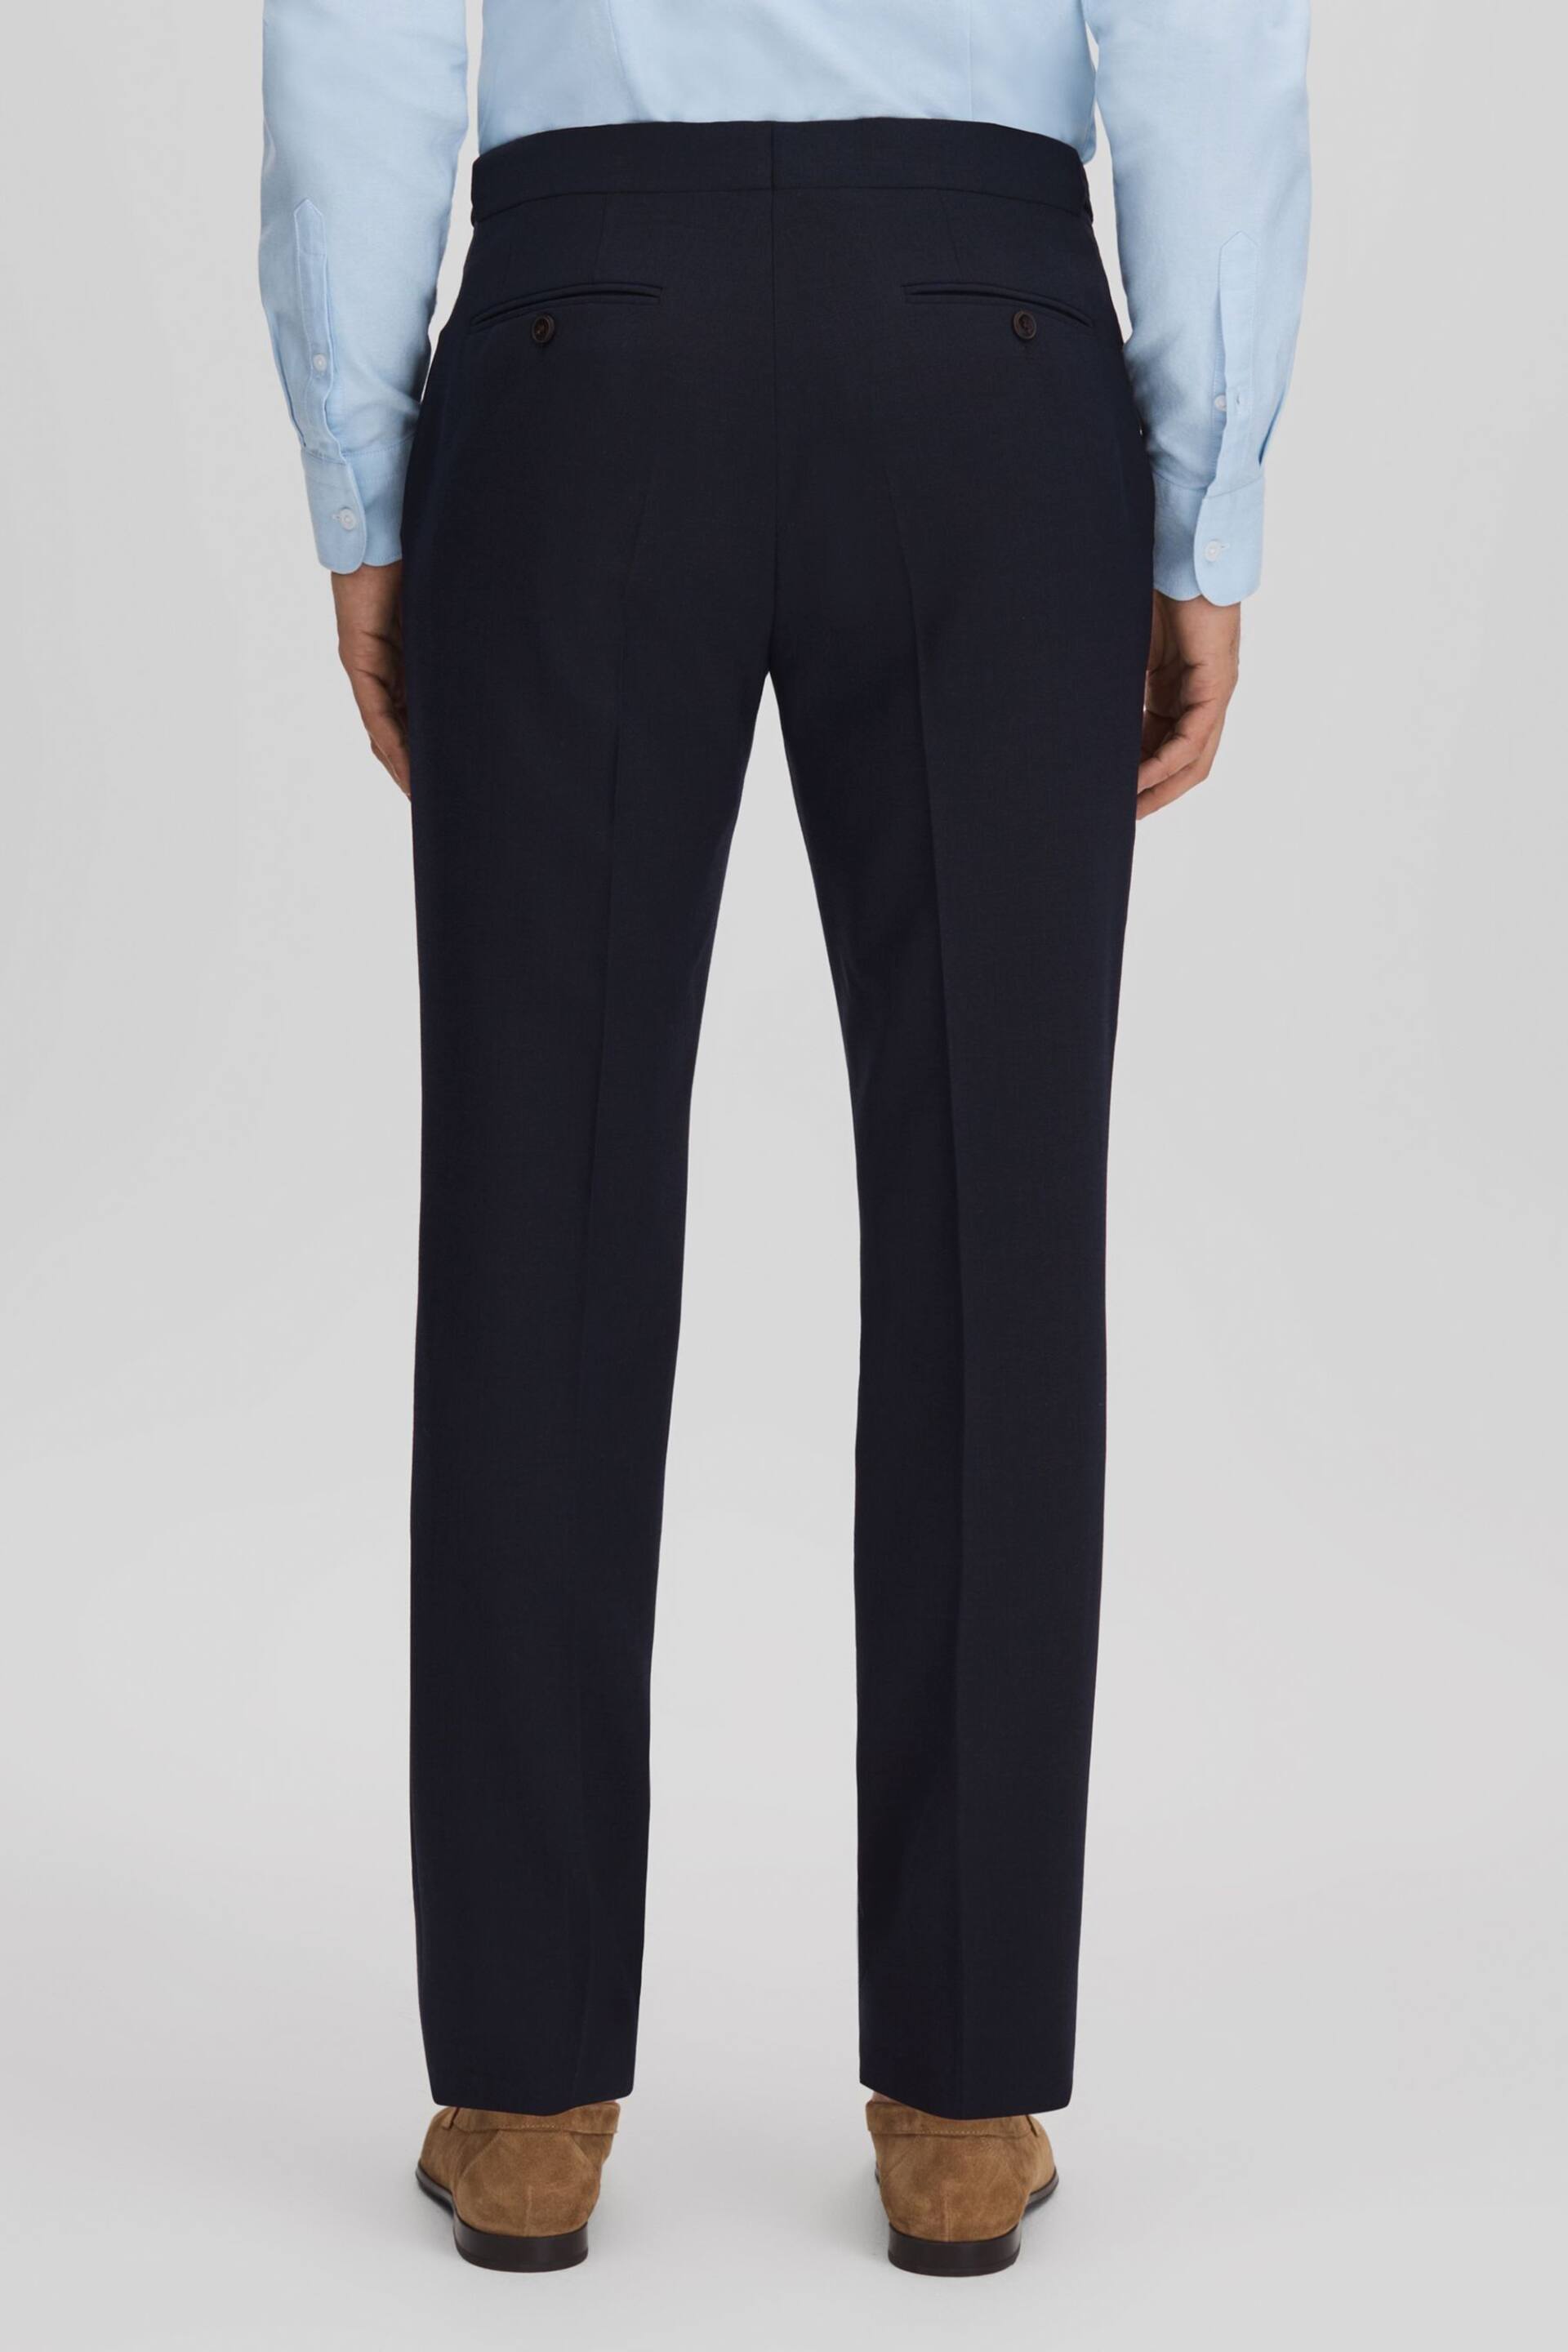 Reiss Navy Belmont Slim Fit Side Adjuster Trousers - Image 5 of 6